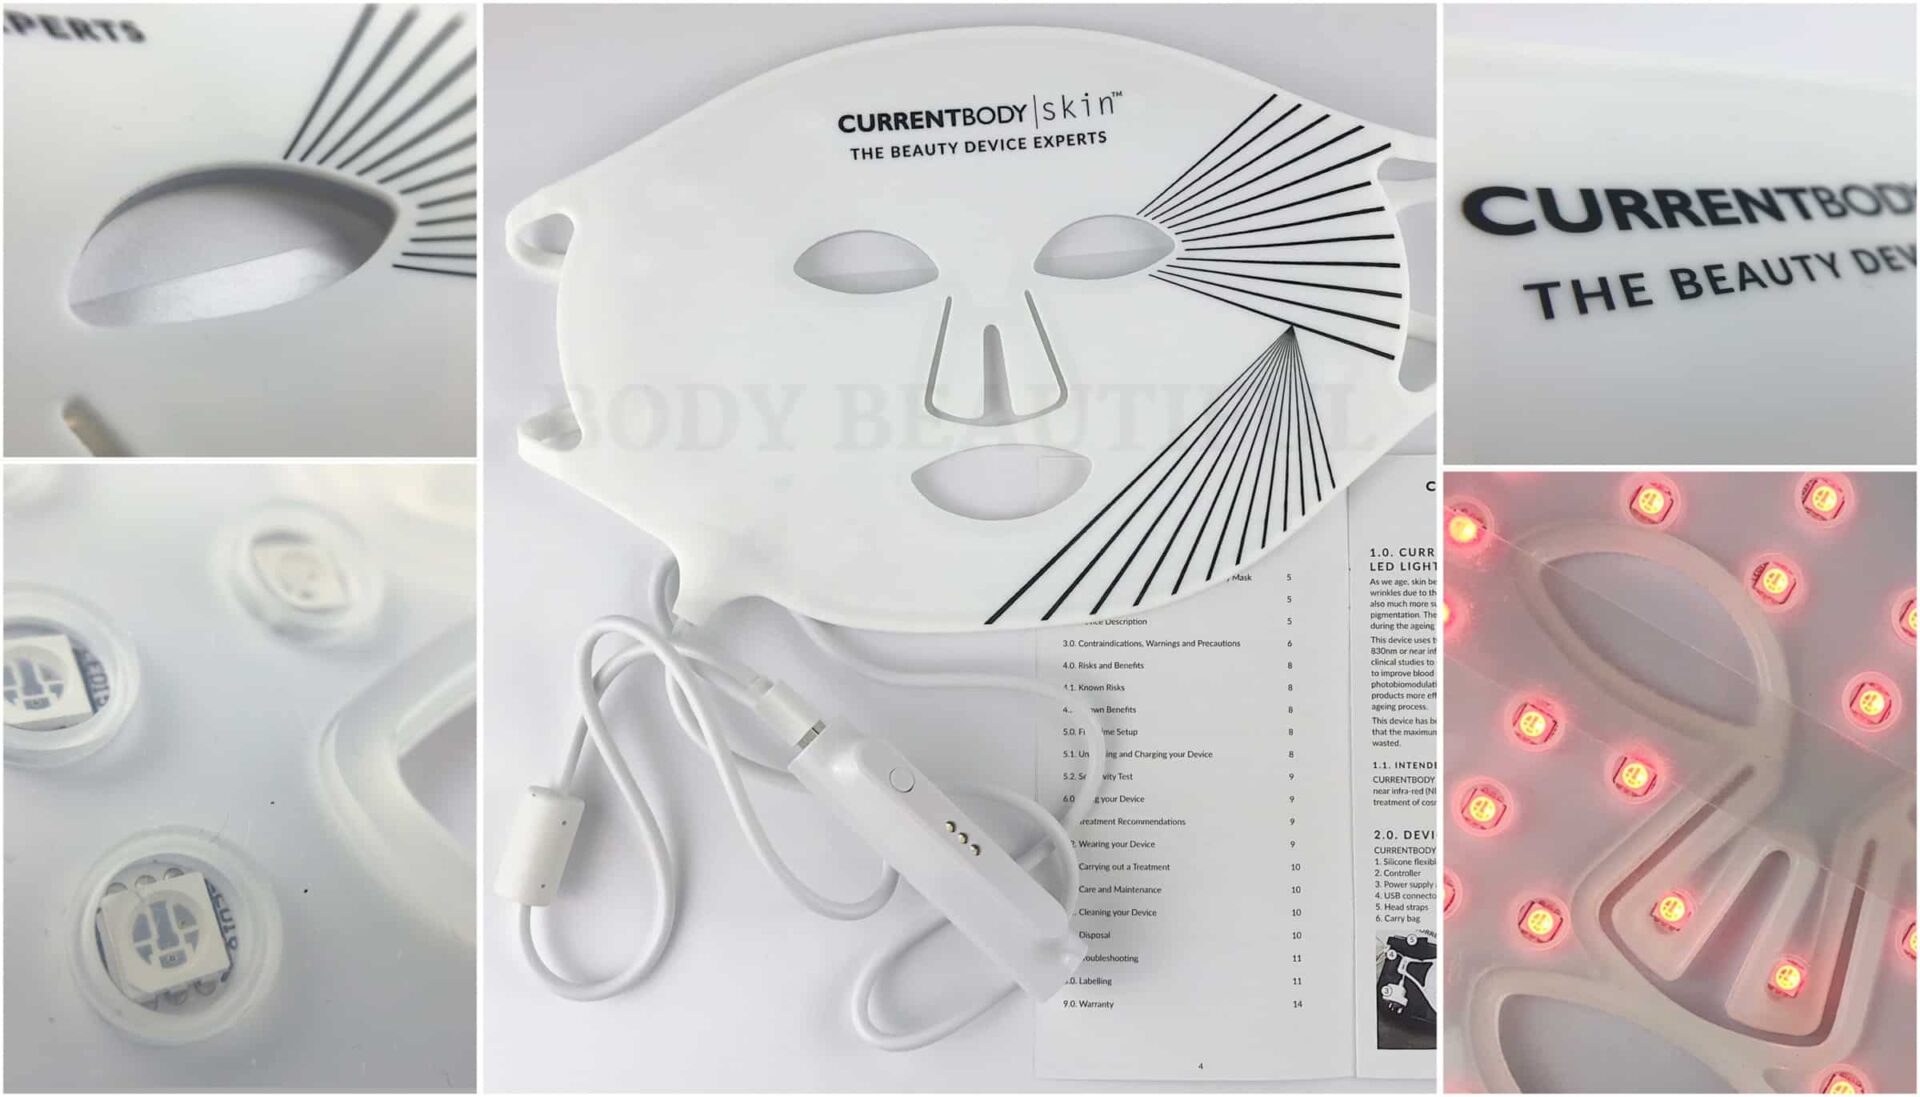 Tried & tested CurrentBody.com Skin LED light therapy mask review by WeAreBodyBeautiful.com